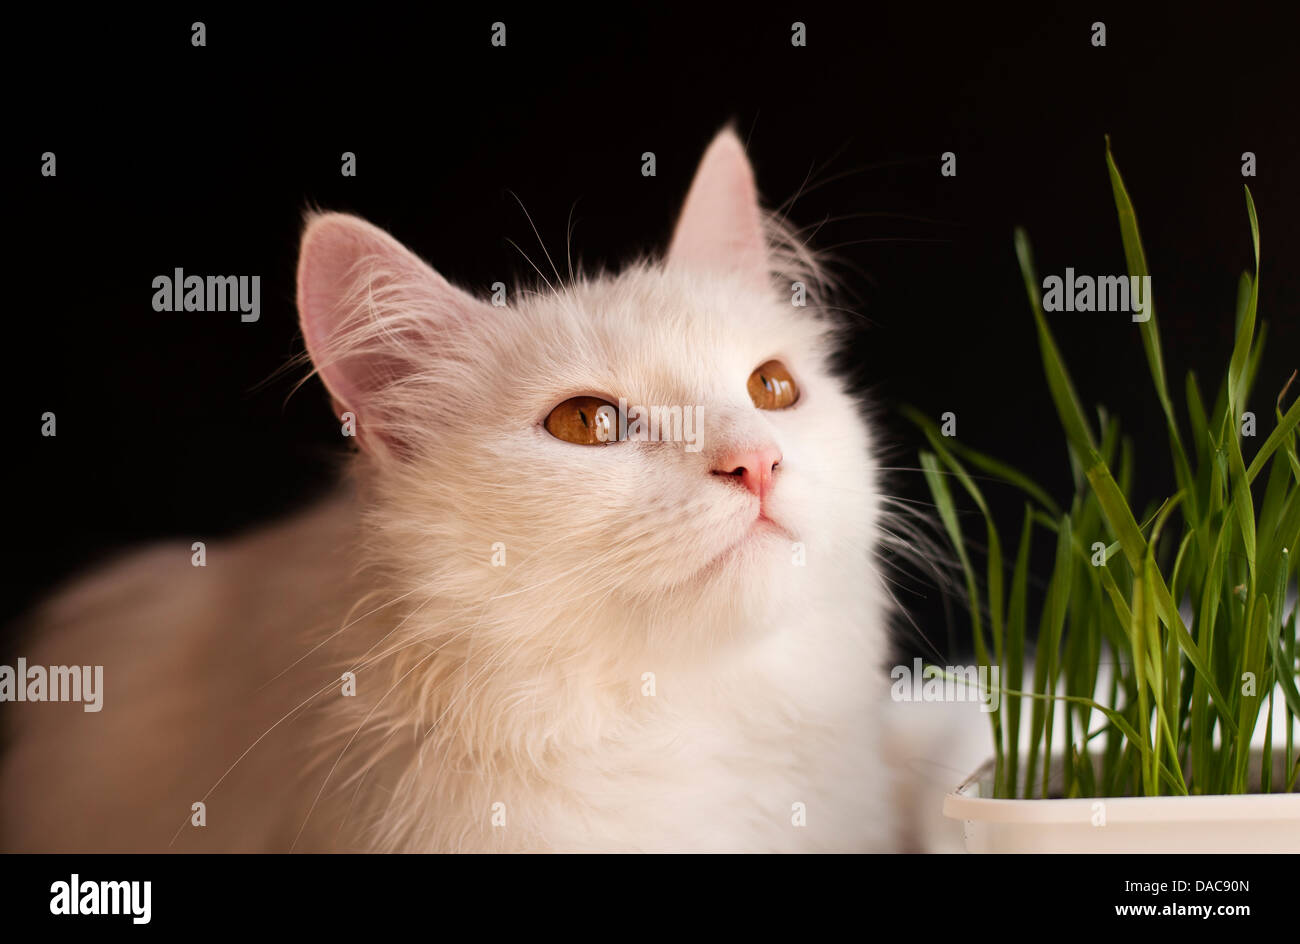 Cat and grass Stock Photo